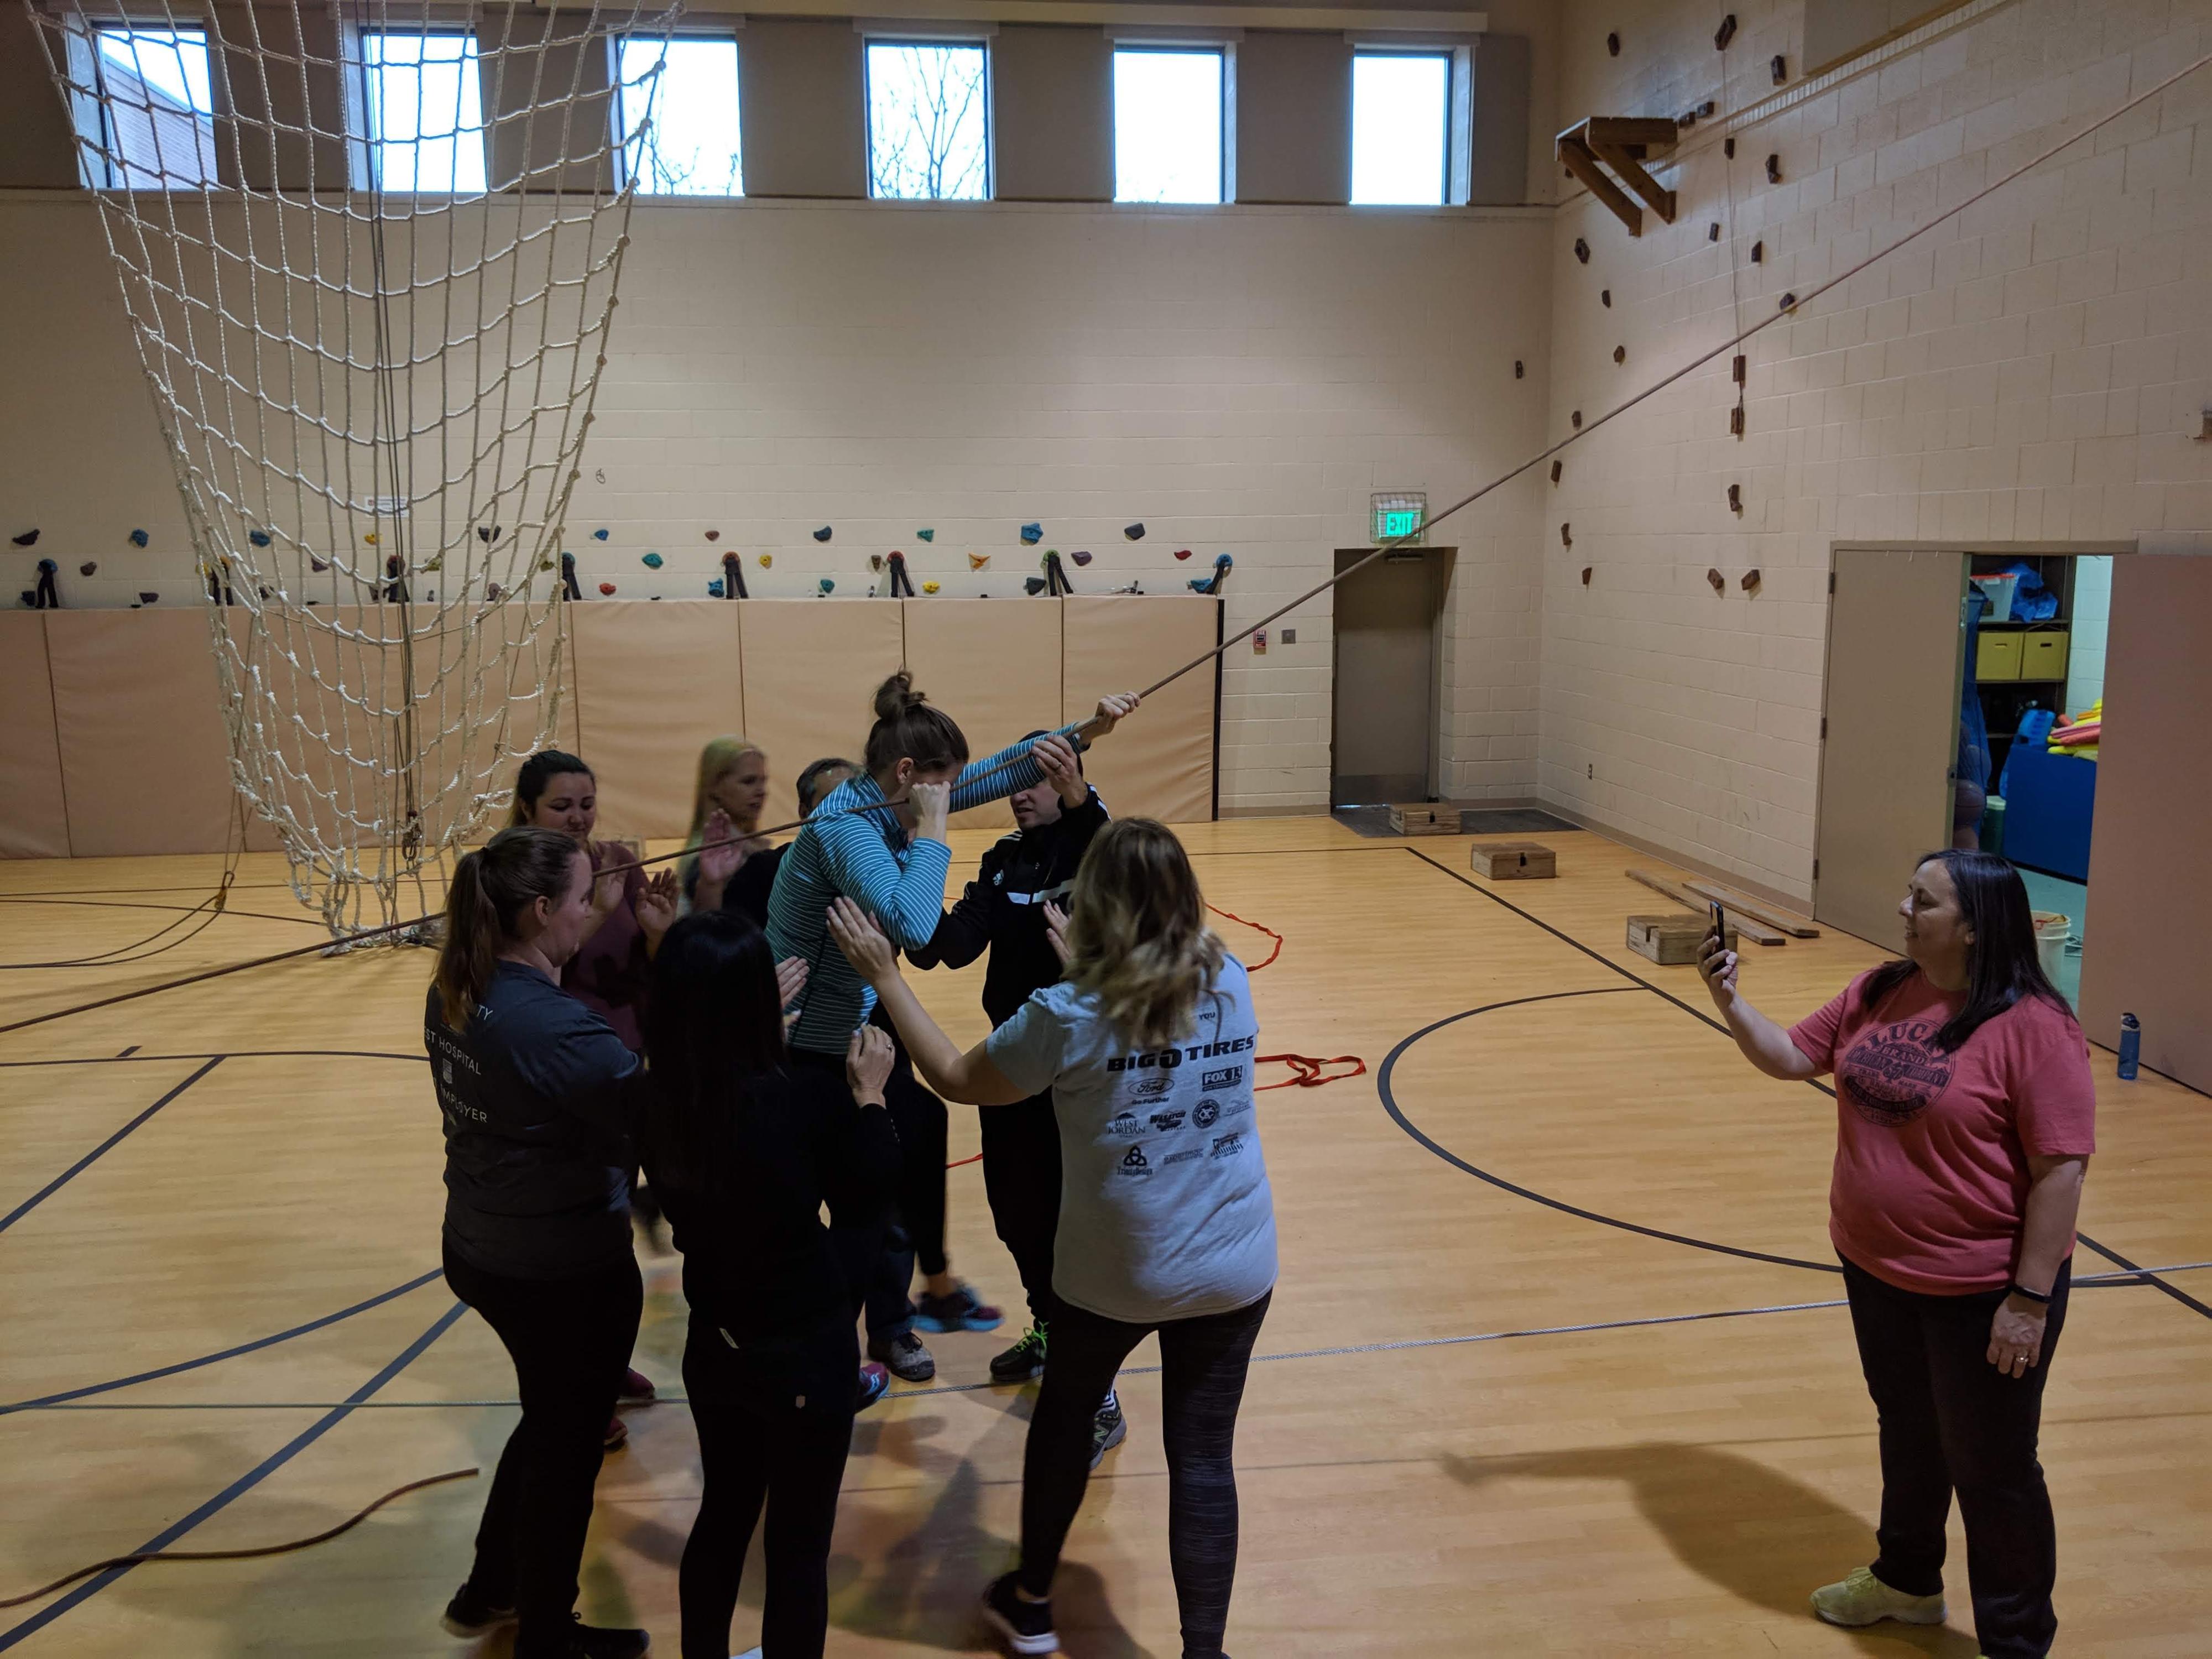 Group of people working as a team to climb through a low indoor ropes course challenge